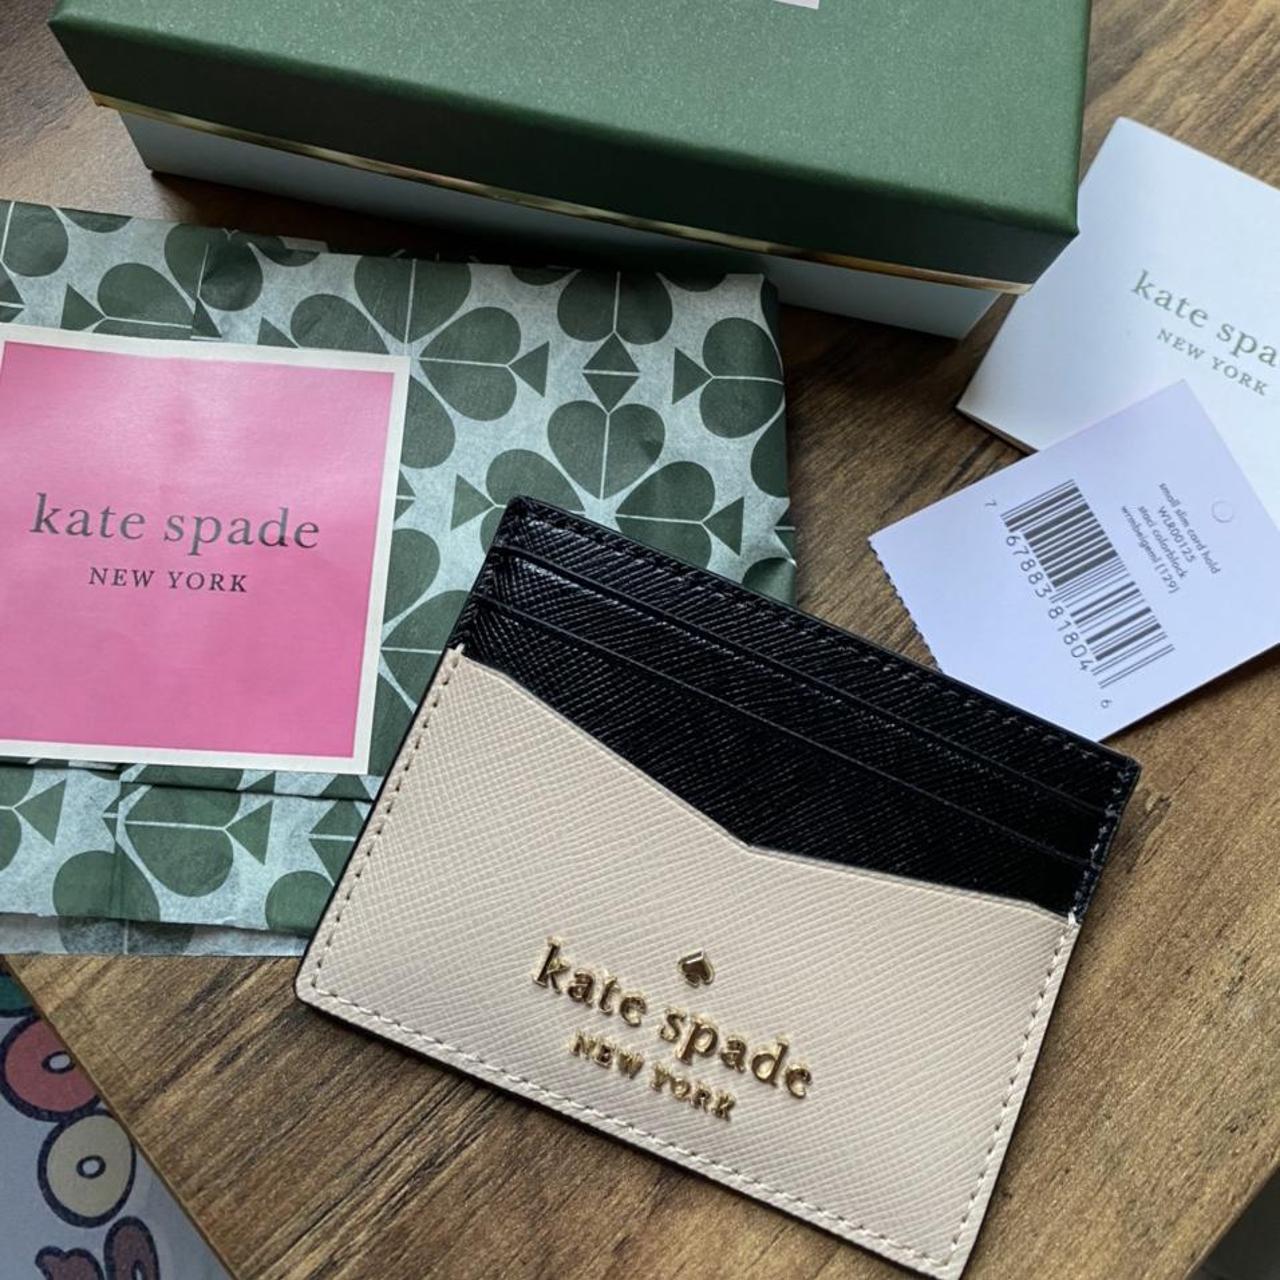 Product Image 1 - Kate spade card holder with